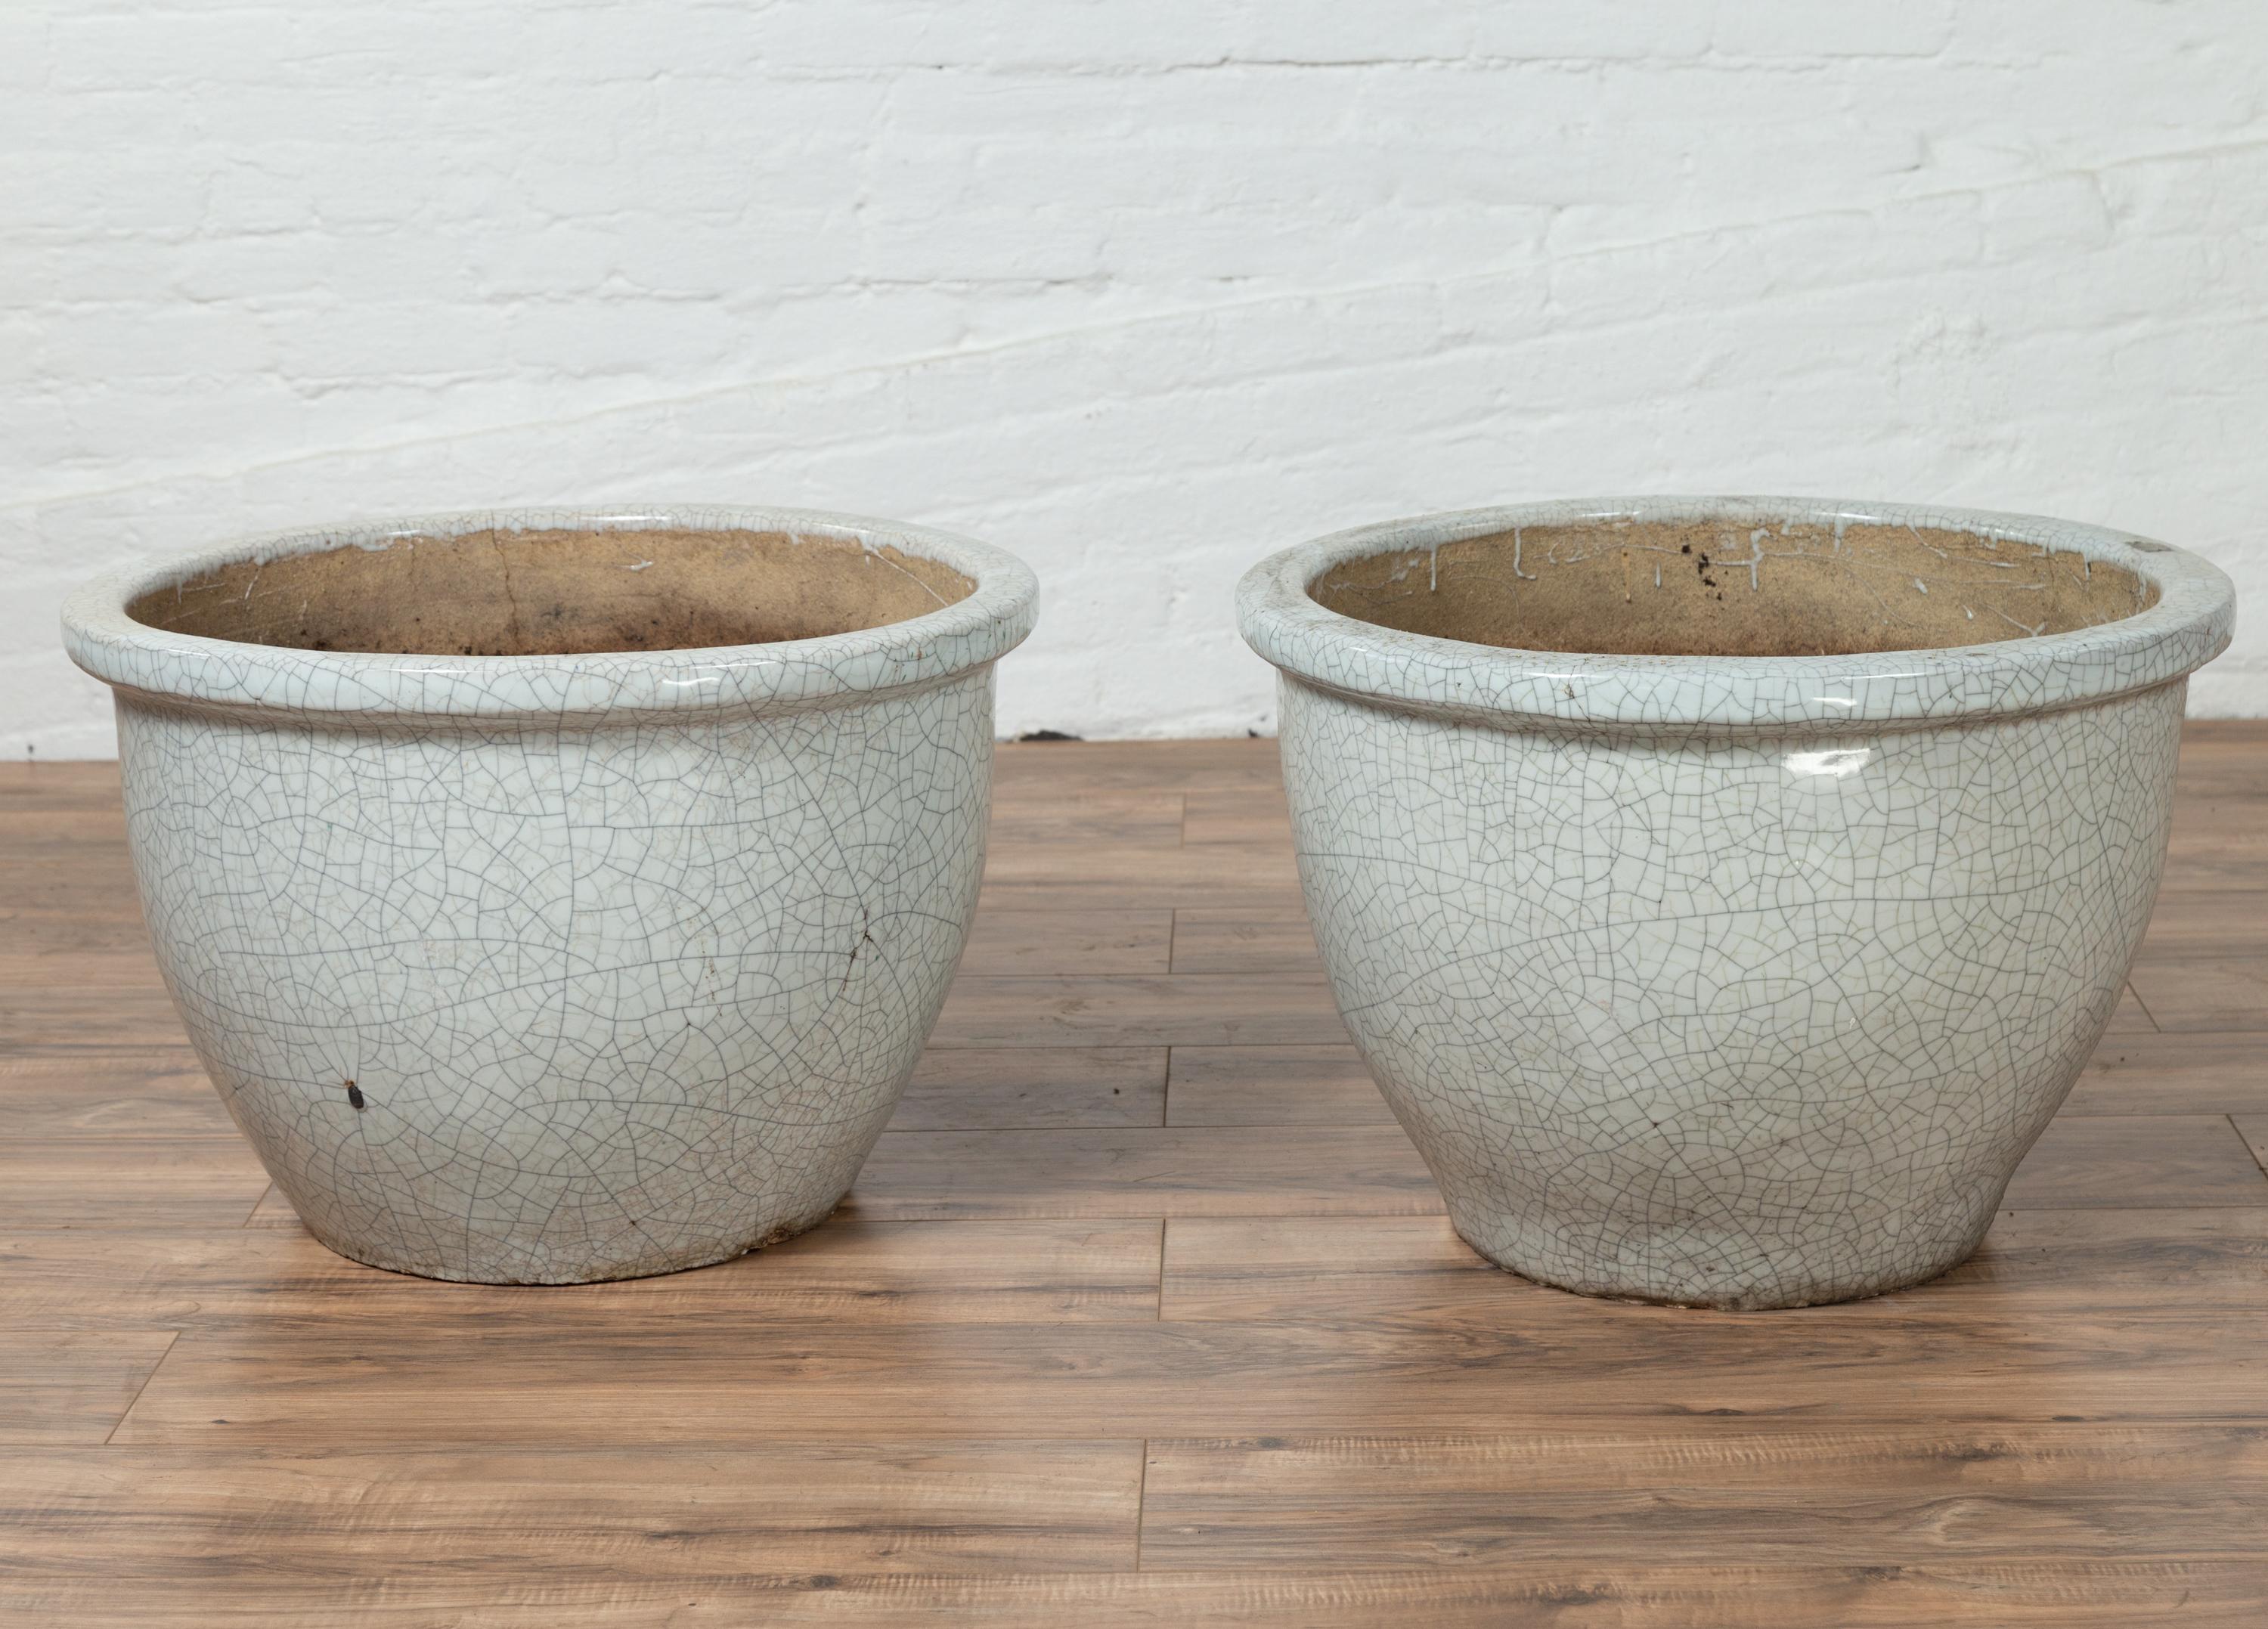 A vintage pair of Chinese large cracked celadon planters from the mid-20th century. Born in China during the midcentury period, each of this pair of large planters features a circular tapering body, accented by a stylish cracked celadon finish.